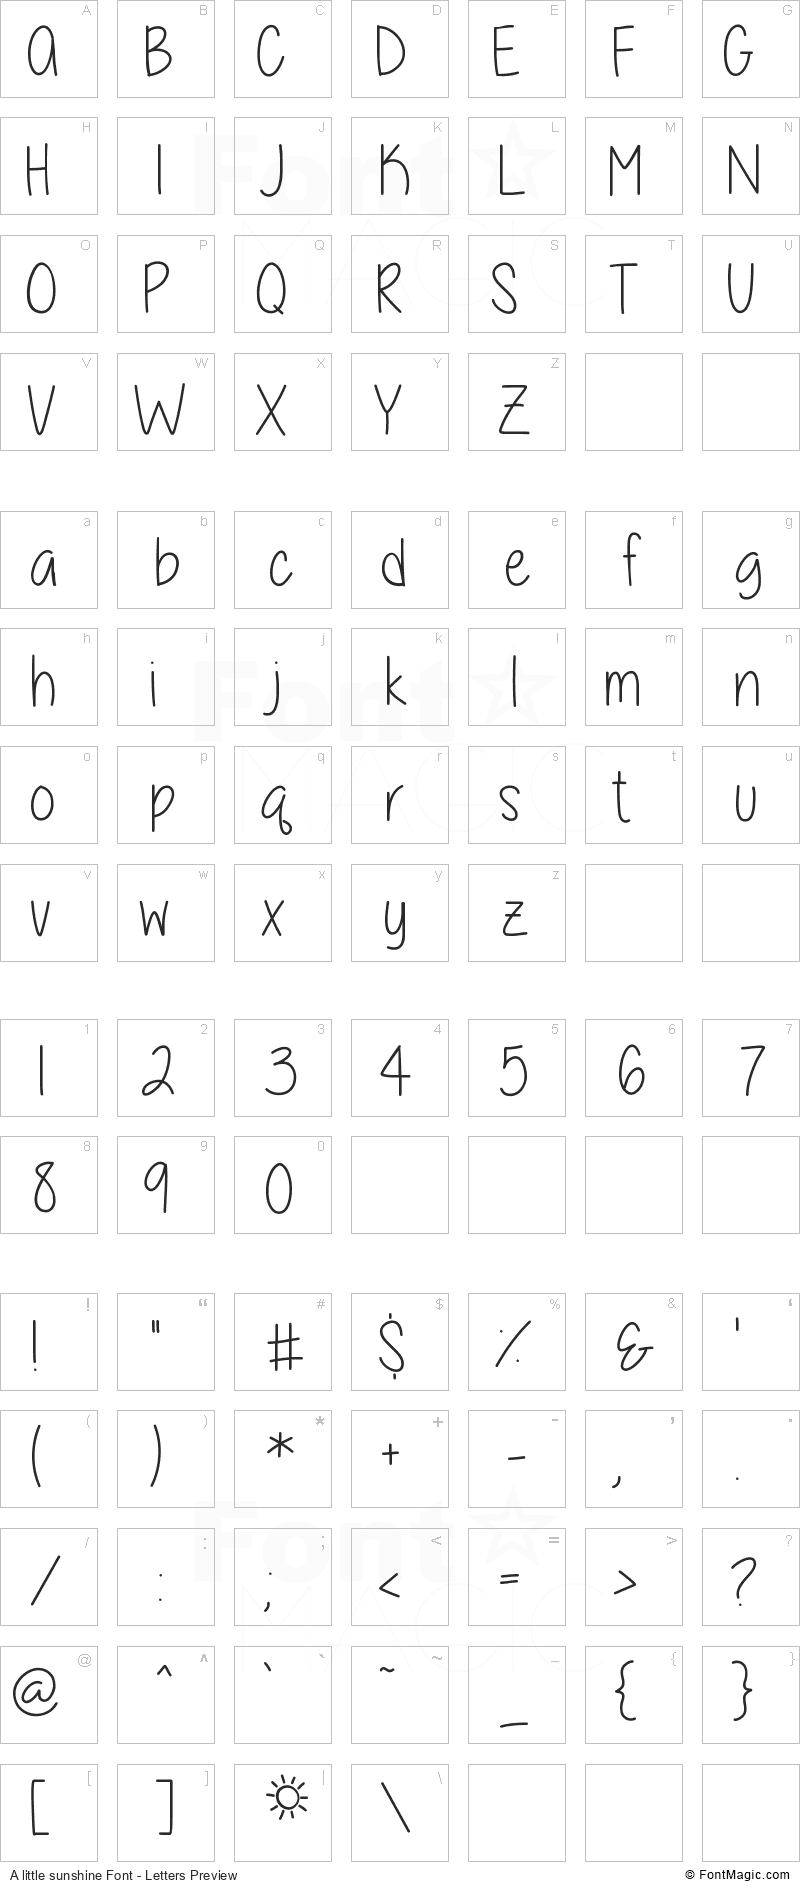 A little sunshine Font - All Latters Preview Chart